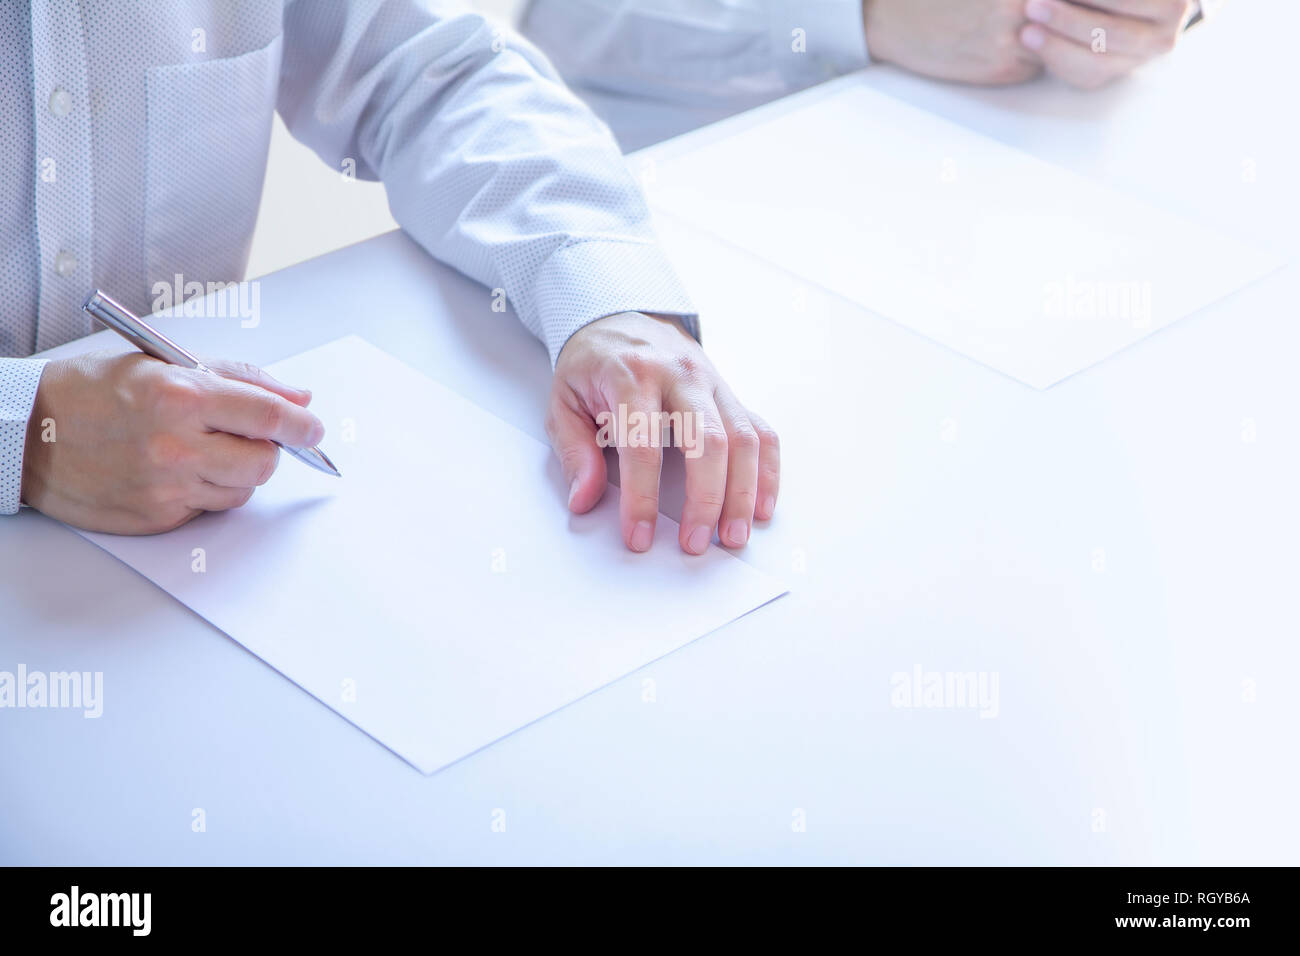 Businessmen in a meeting room partially cropped at their hands holding a pen with writing gesture on a plain blank white paper document as a blank moc Stock Photo